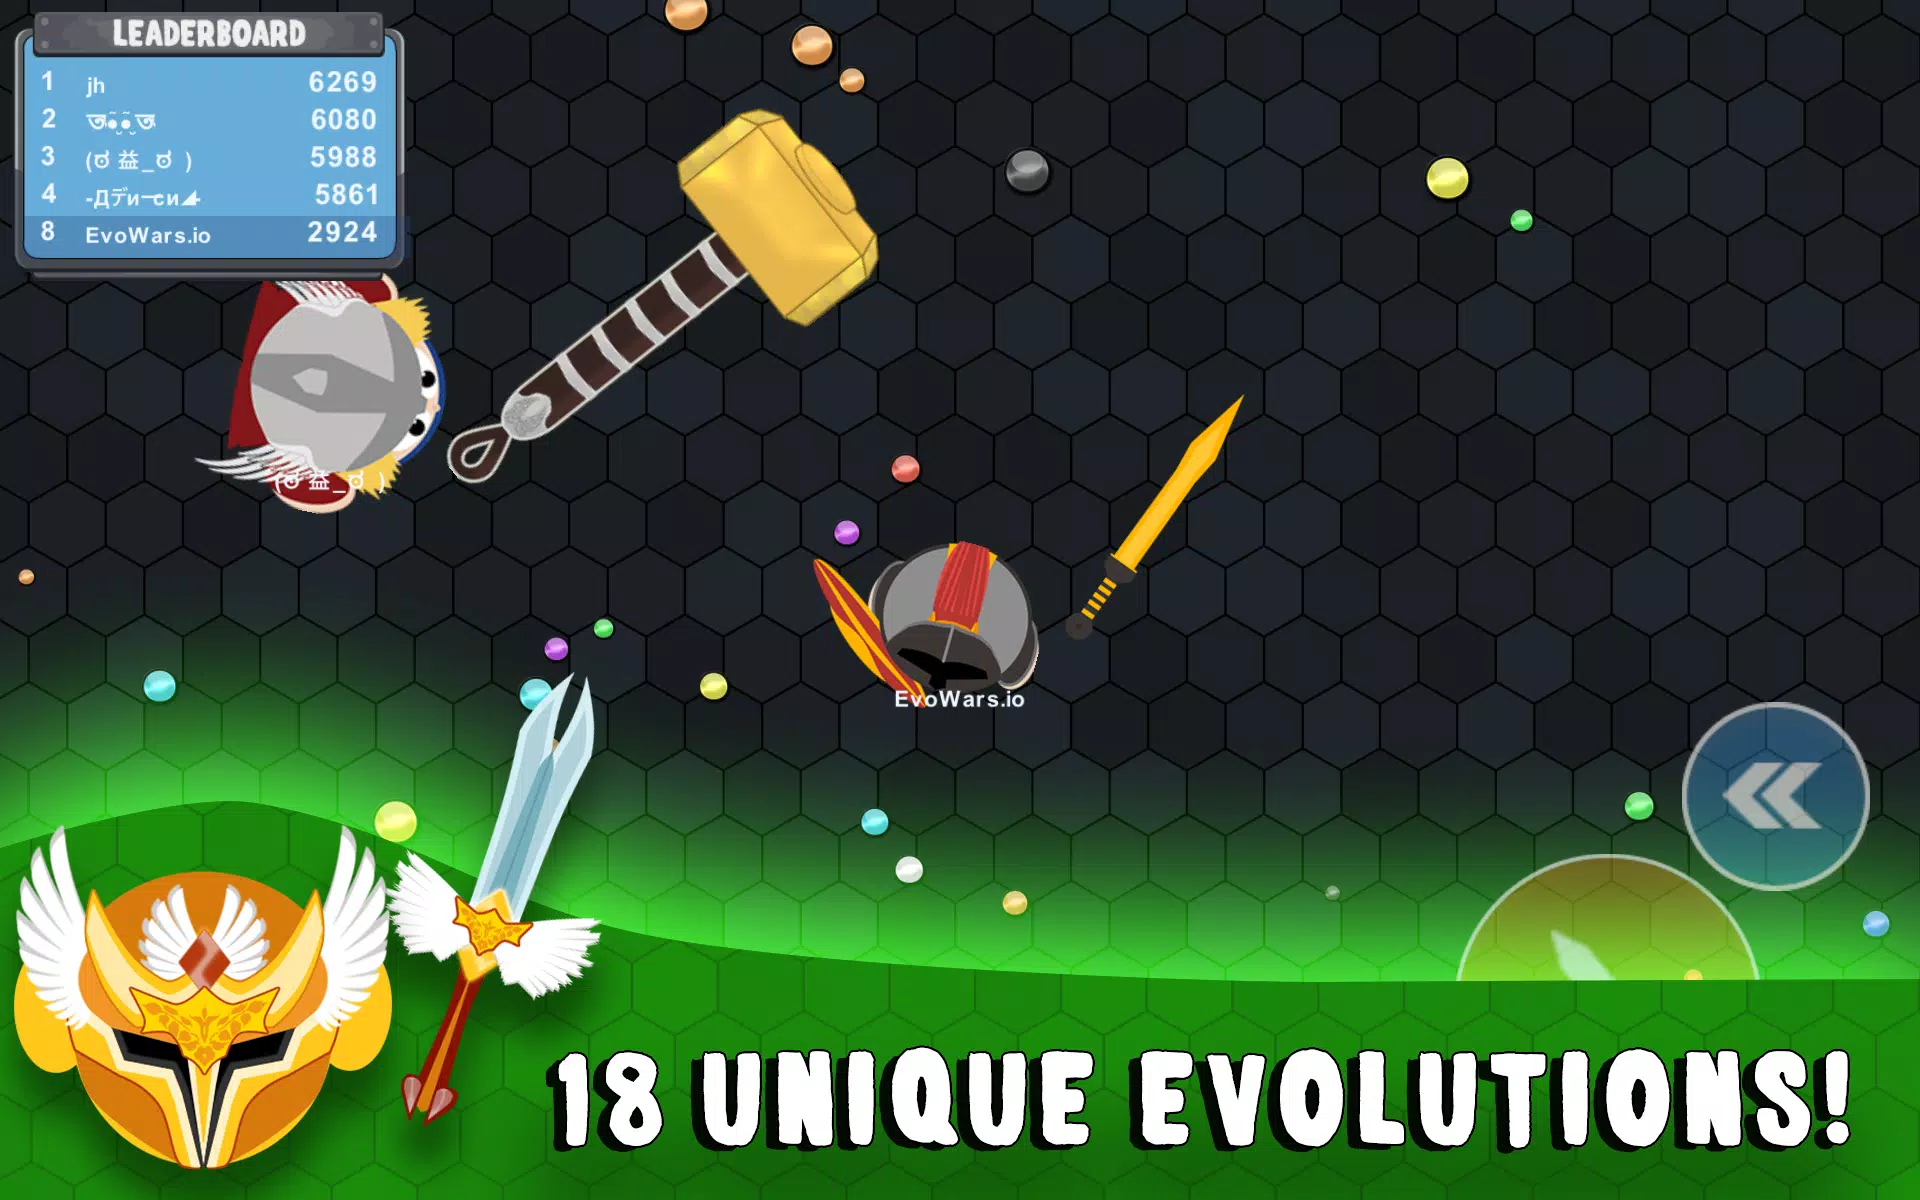 Download Evowars.io MOD APK 1.7.8 (Immortal, Level, One Hit) for Android iOS